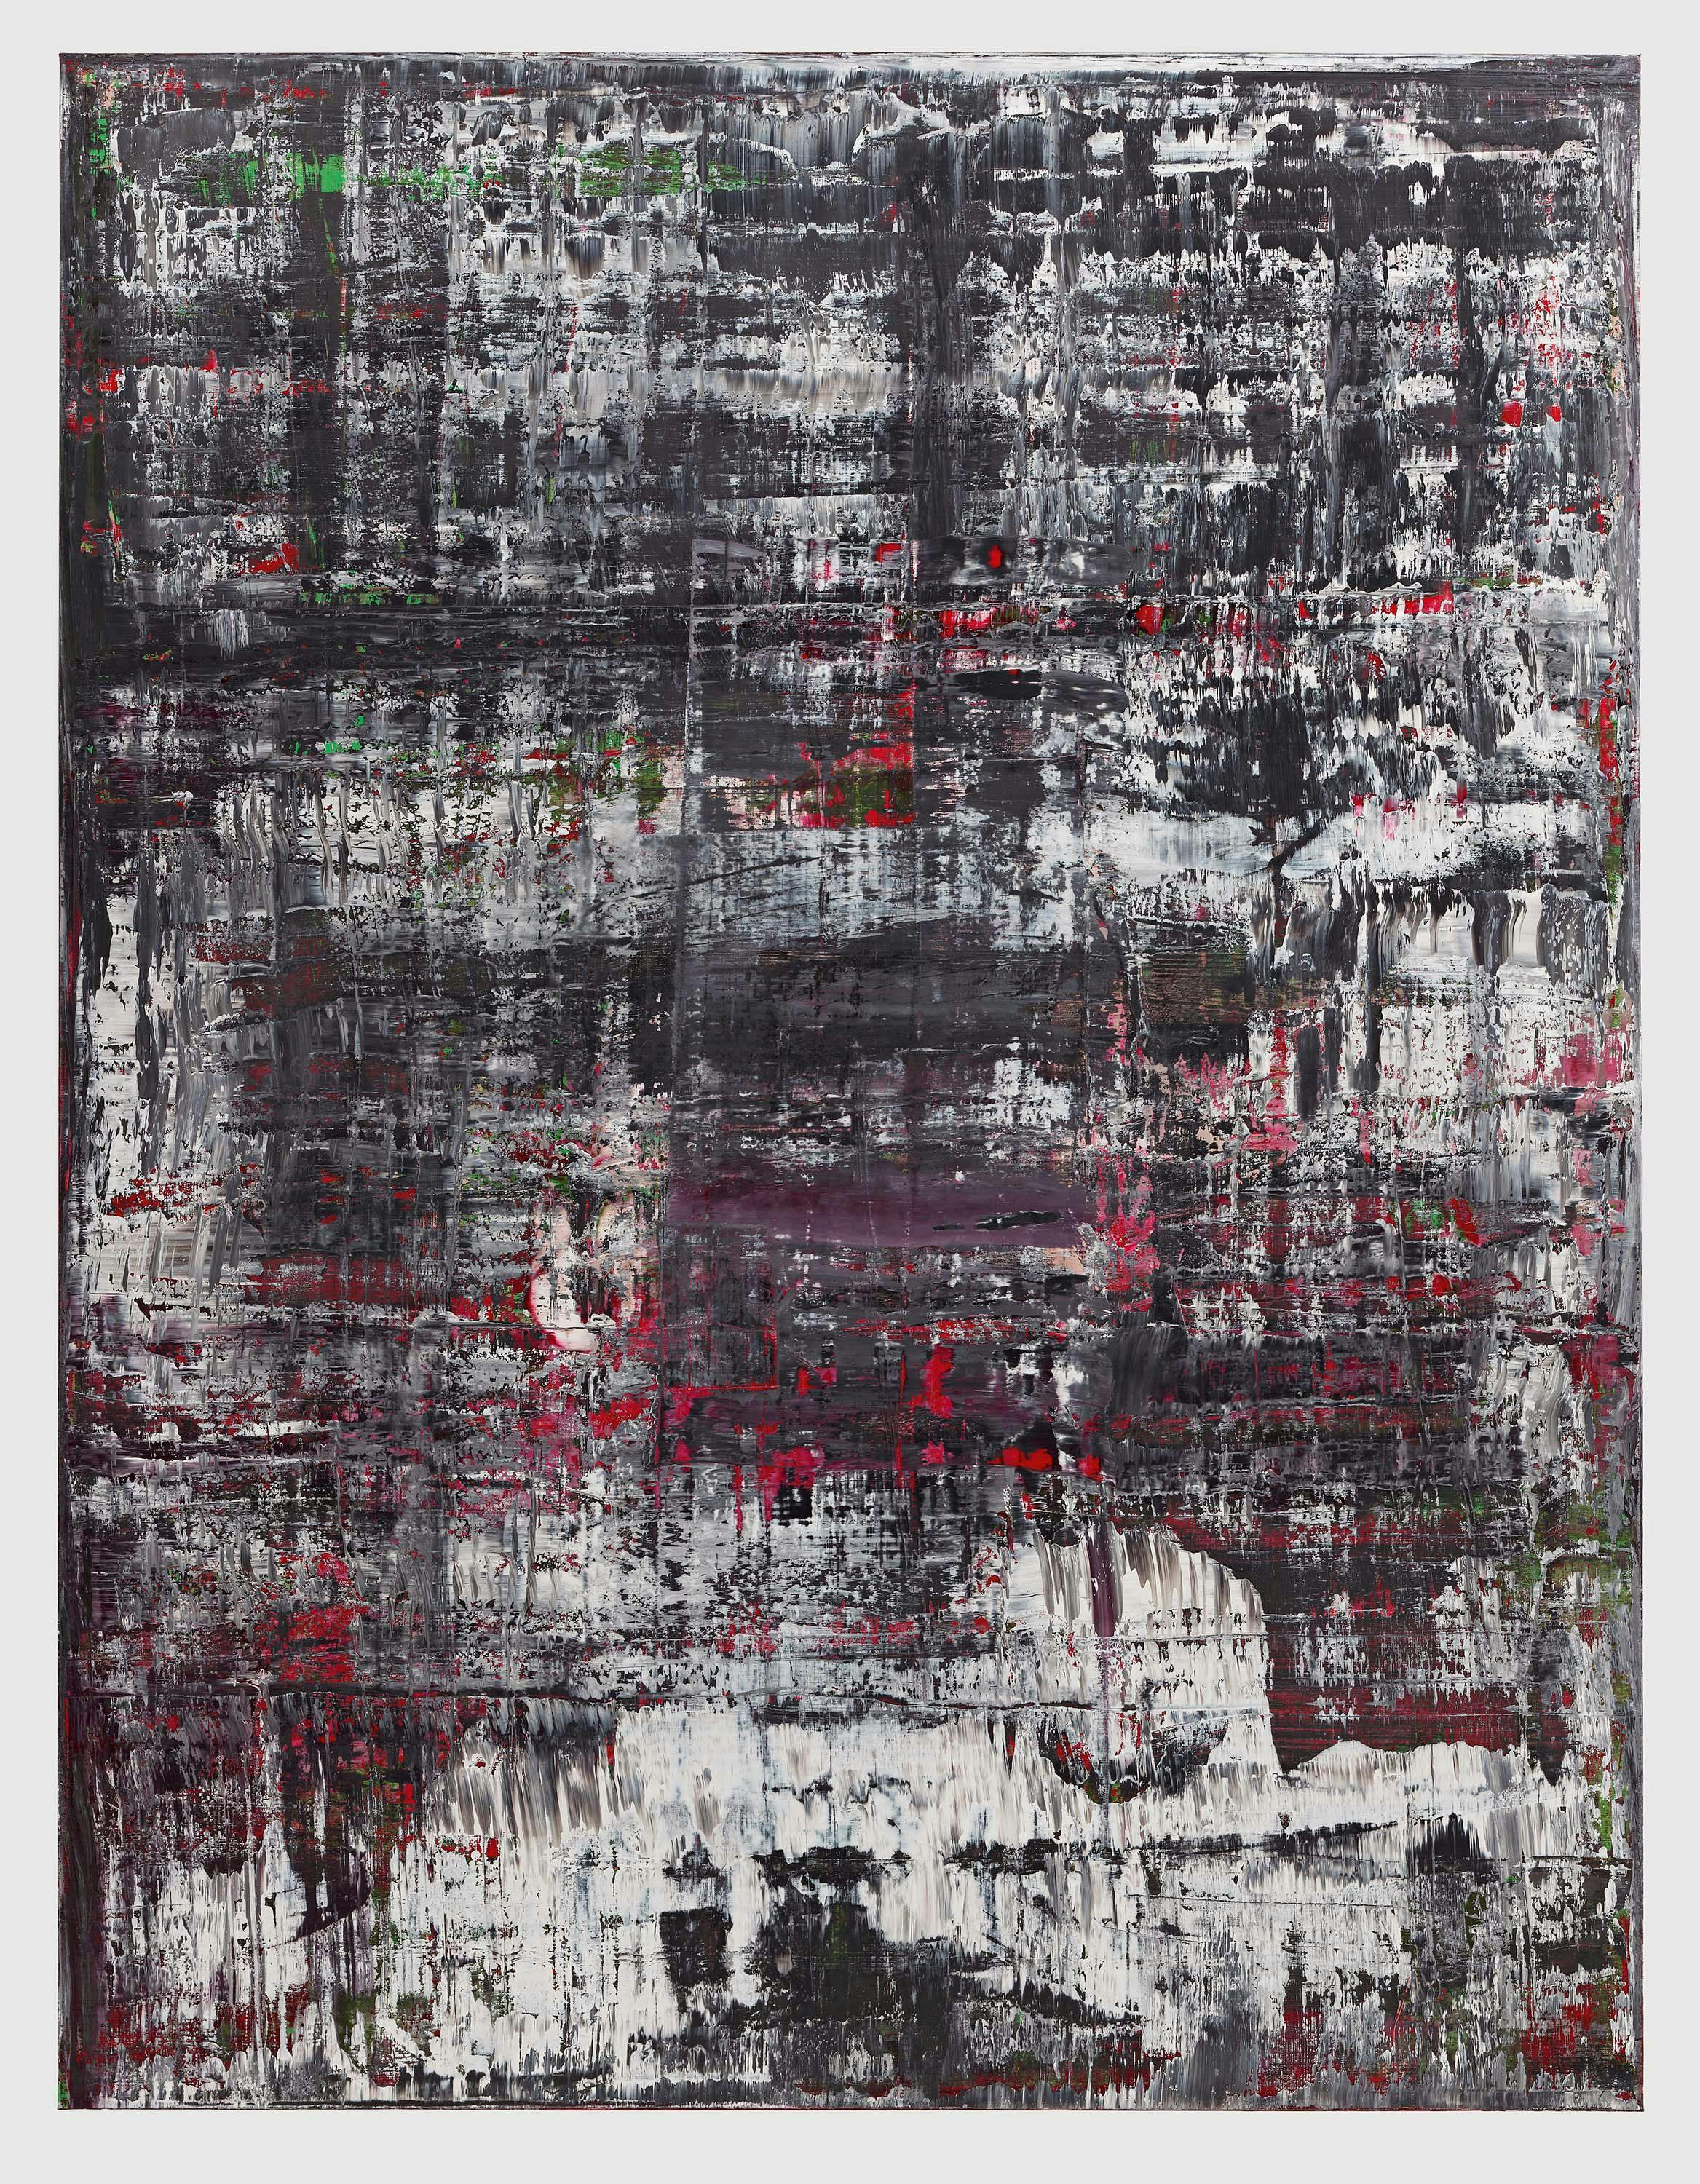 A painting by Gerhard Richter, titled Birkenau, 2014.